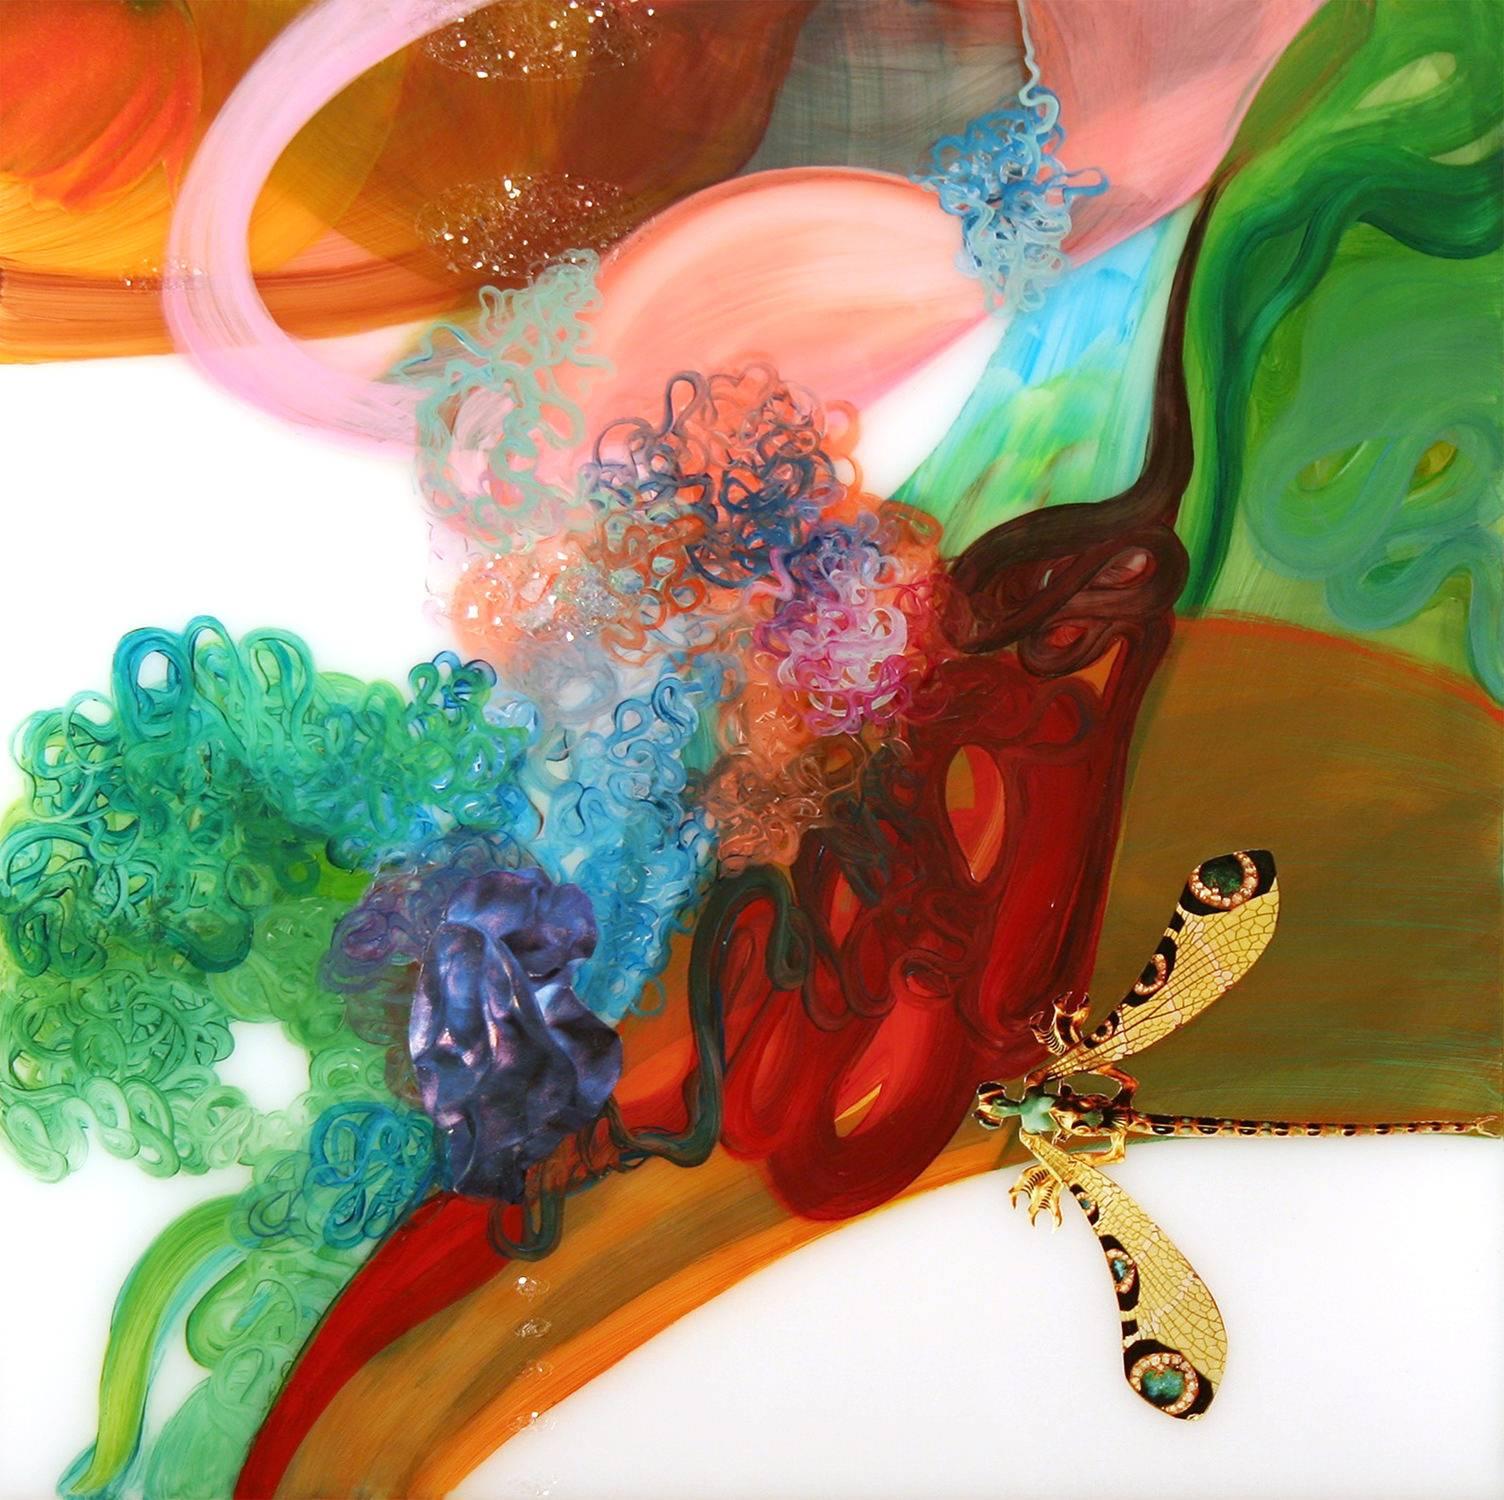 Lorraine Glessner Animal Painting - Bitten, Multi-Colored Abstract Painting with Diamond Dust on Acrylic Panel